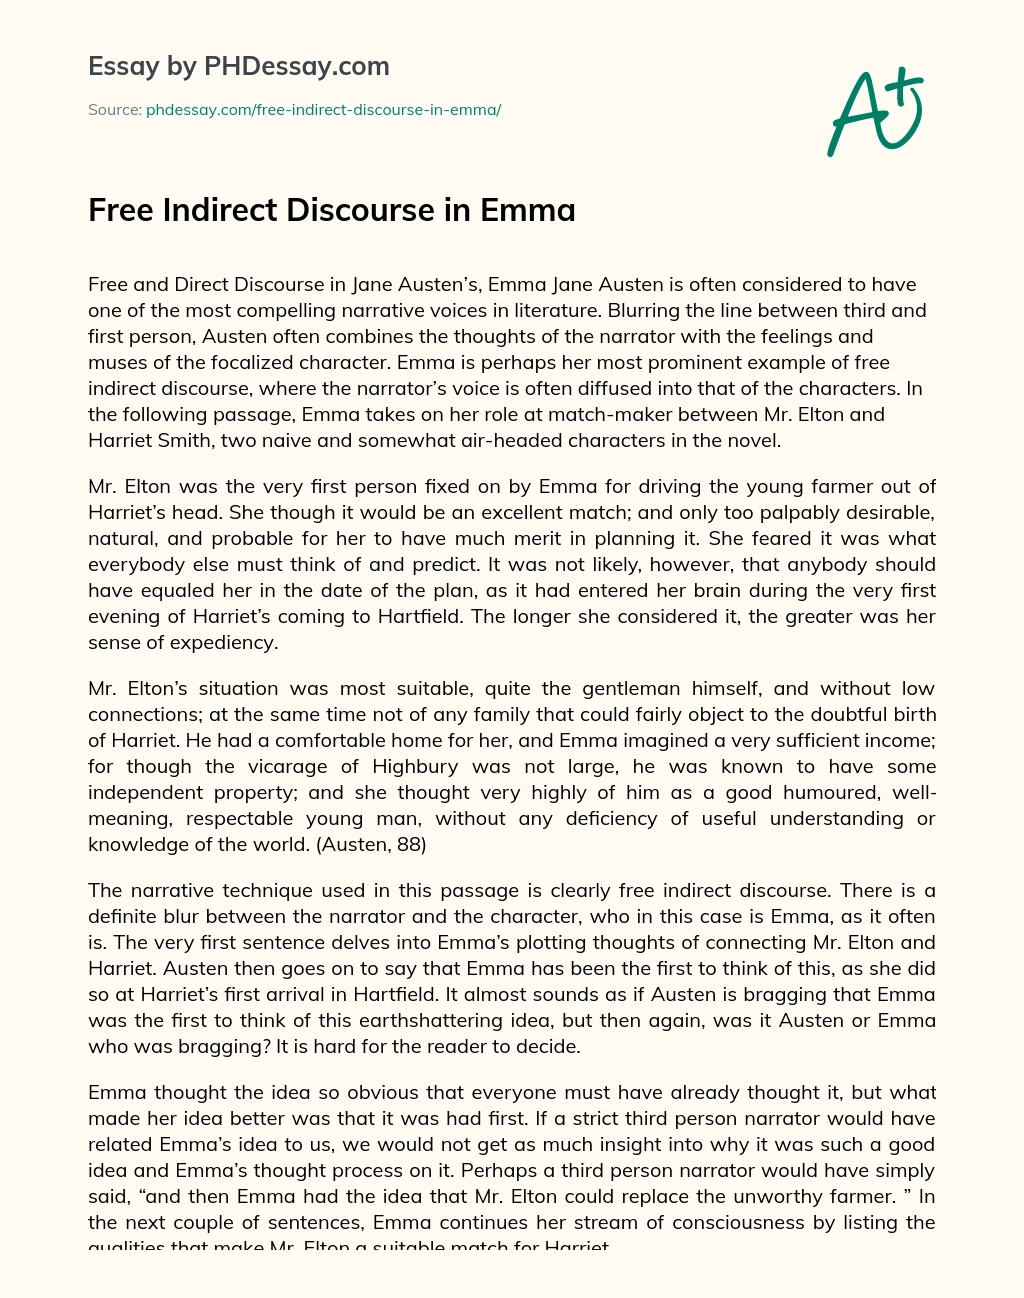 Free Indirect Discourse in Emma essay